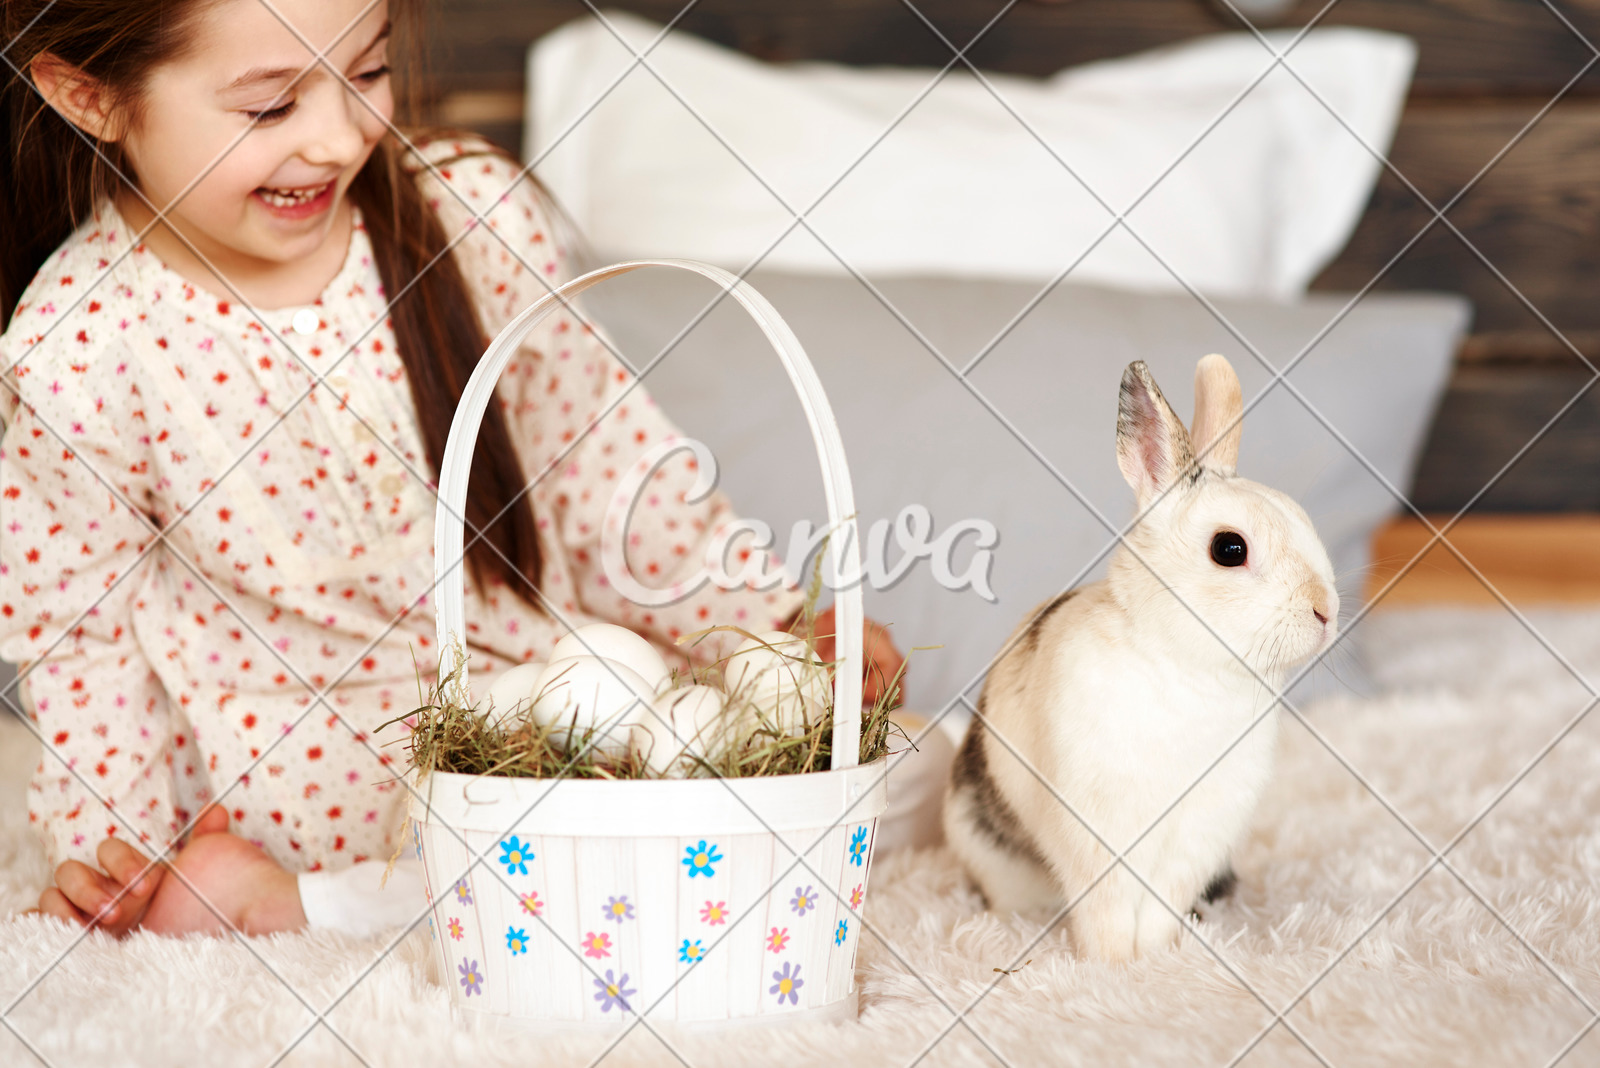 Girl Having Fun With Rabbit In Bedroom Photos By Canva